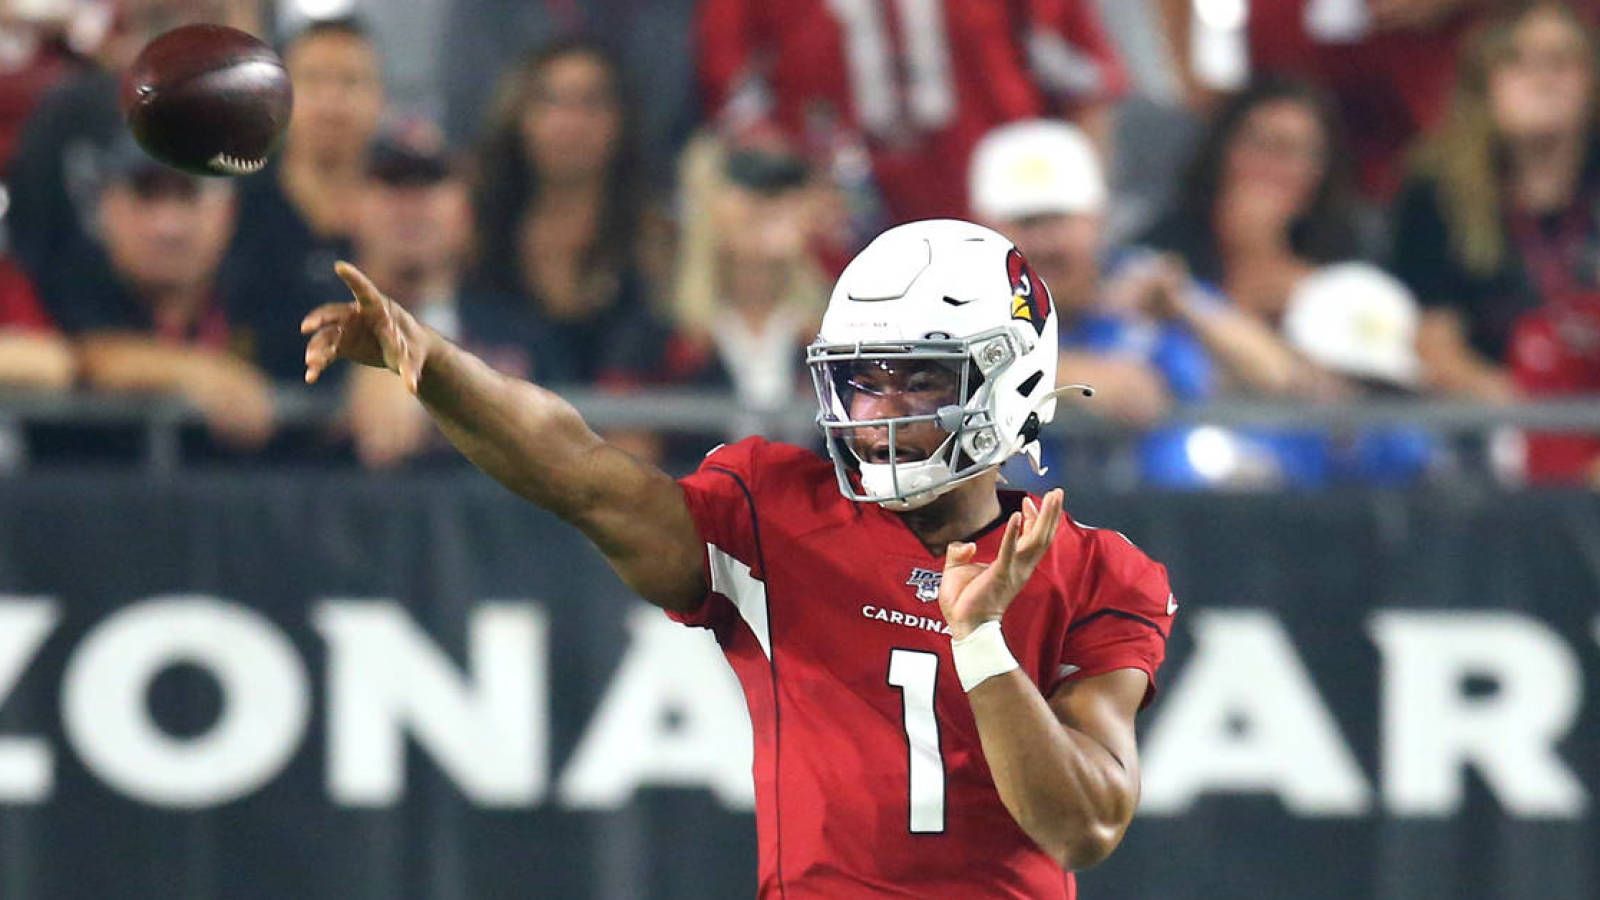 Watch: Cardinals rookie QB Kyler Murray is perfect in NFL debut